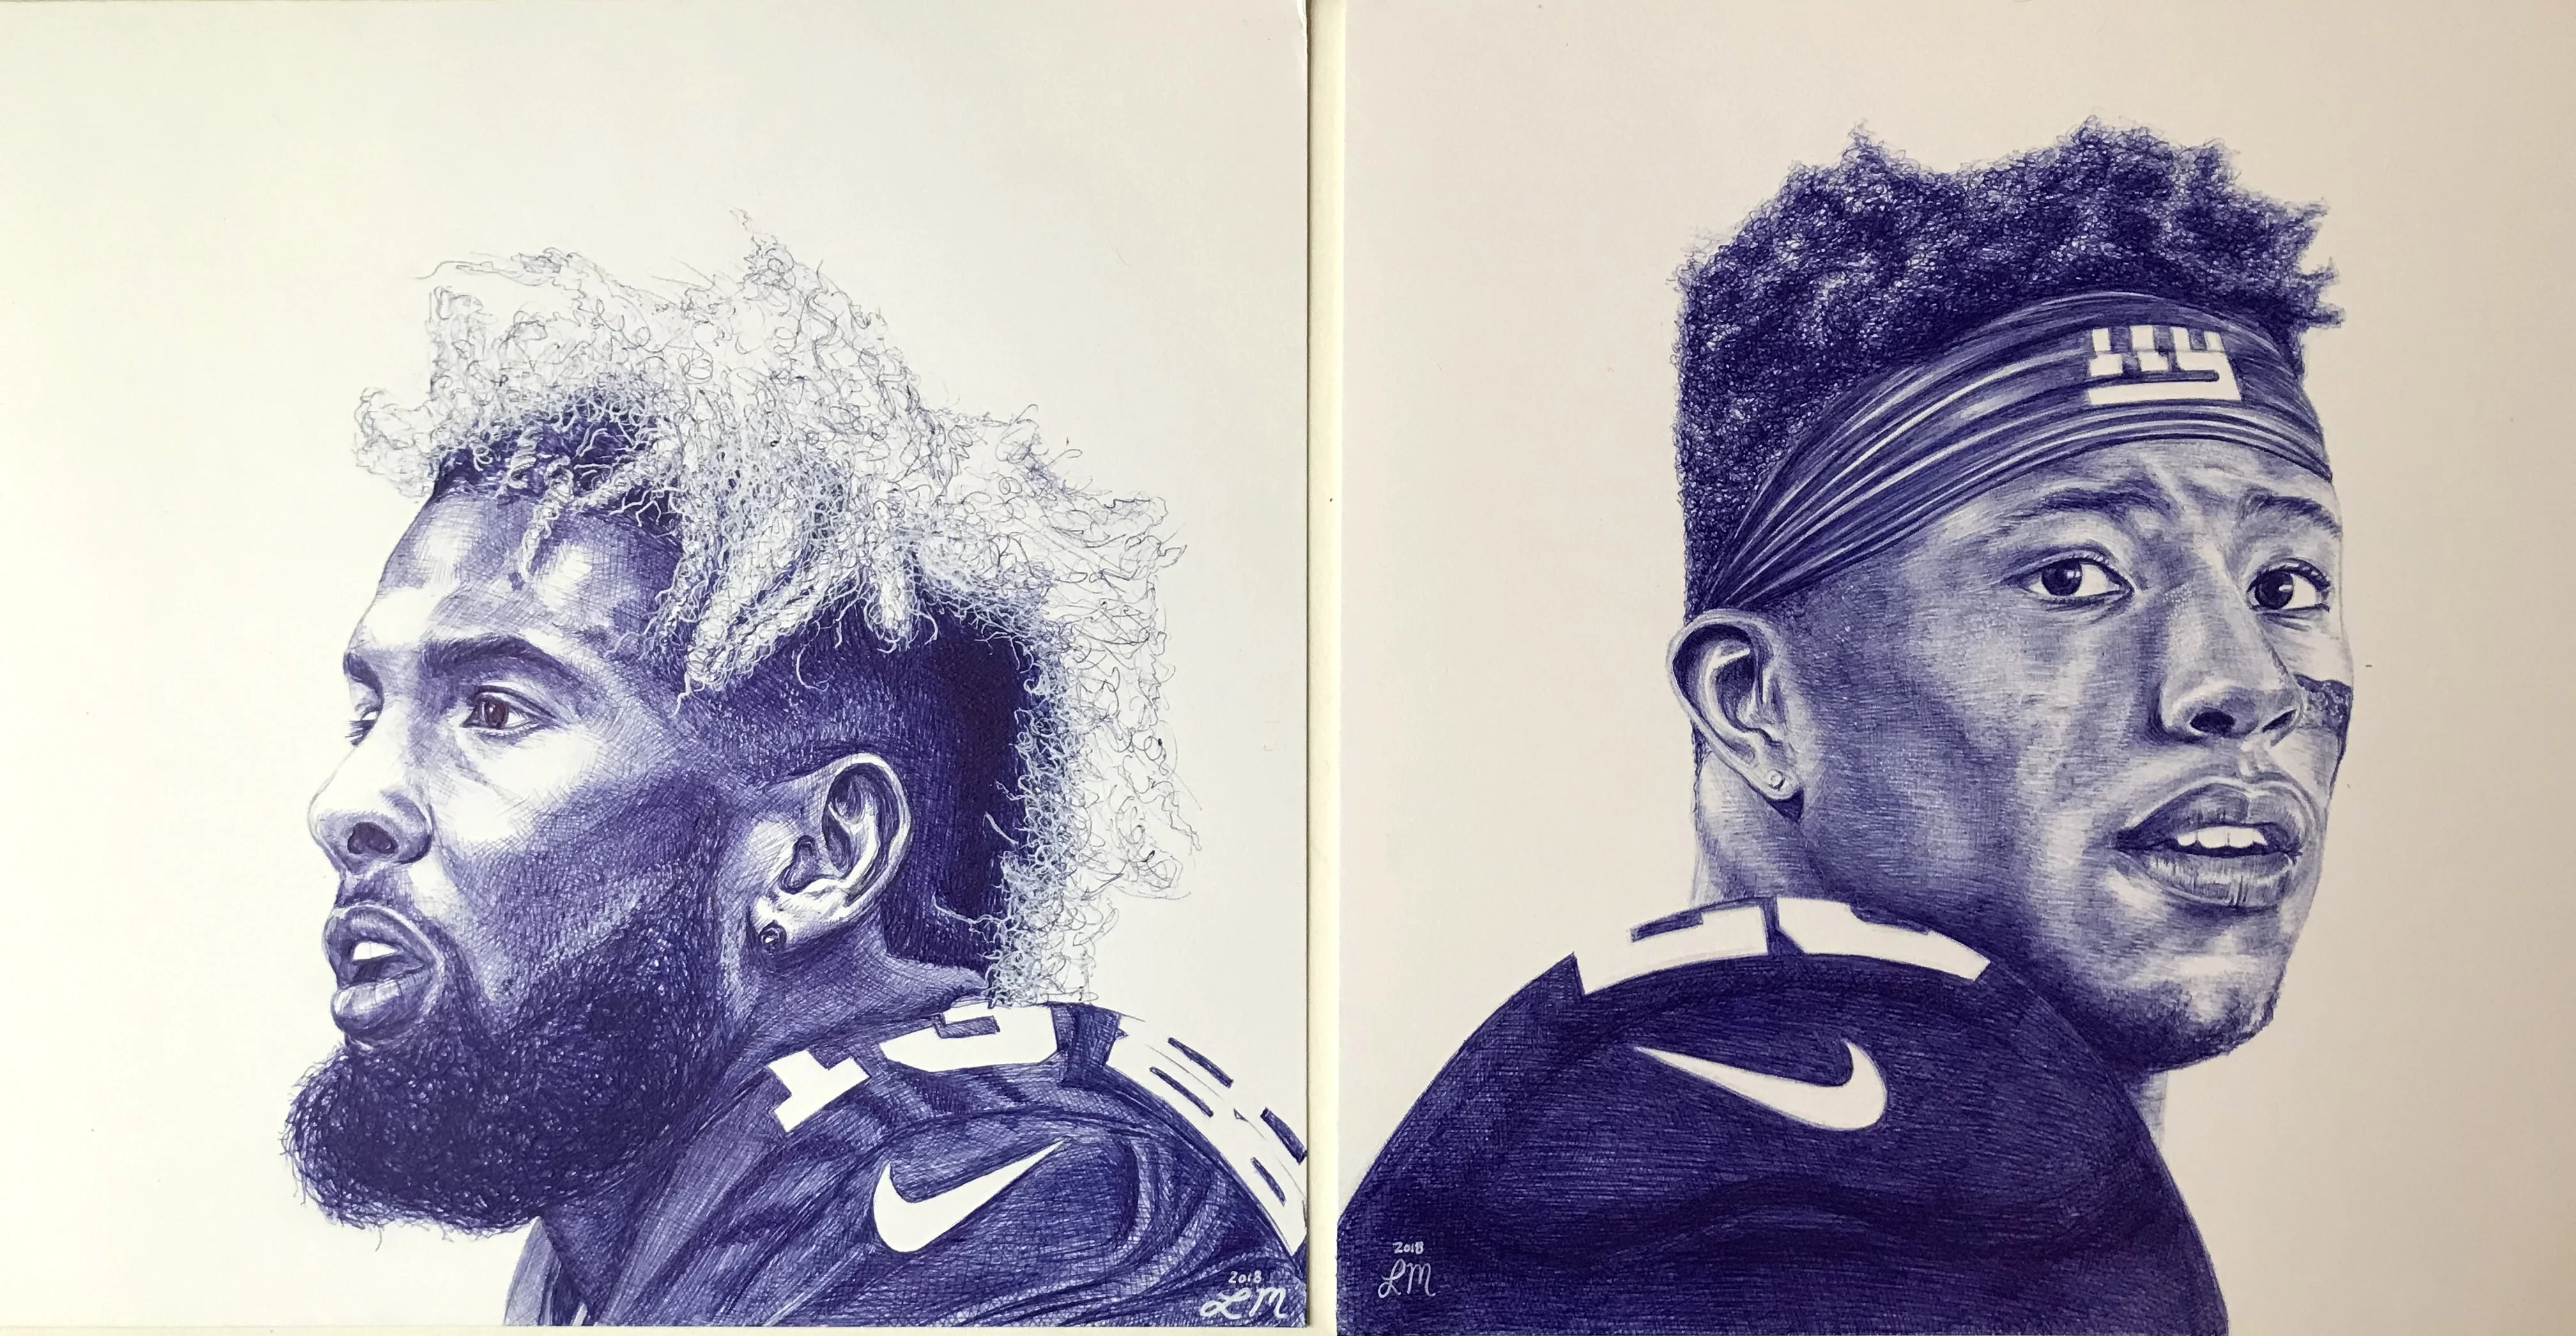 Pen drawings of Odell and Saquon